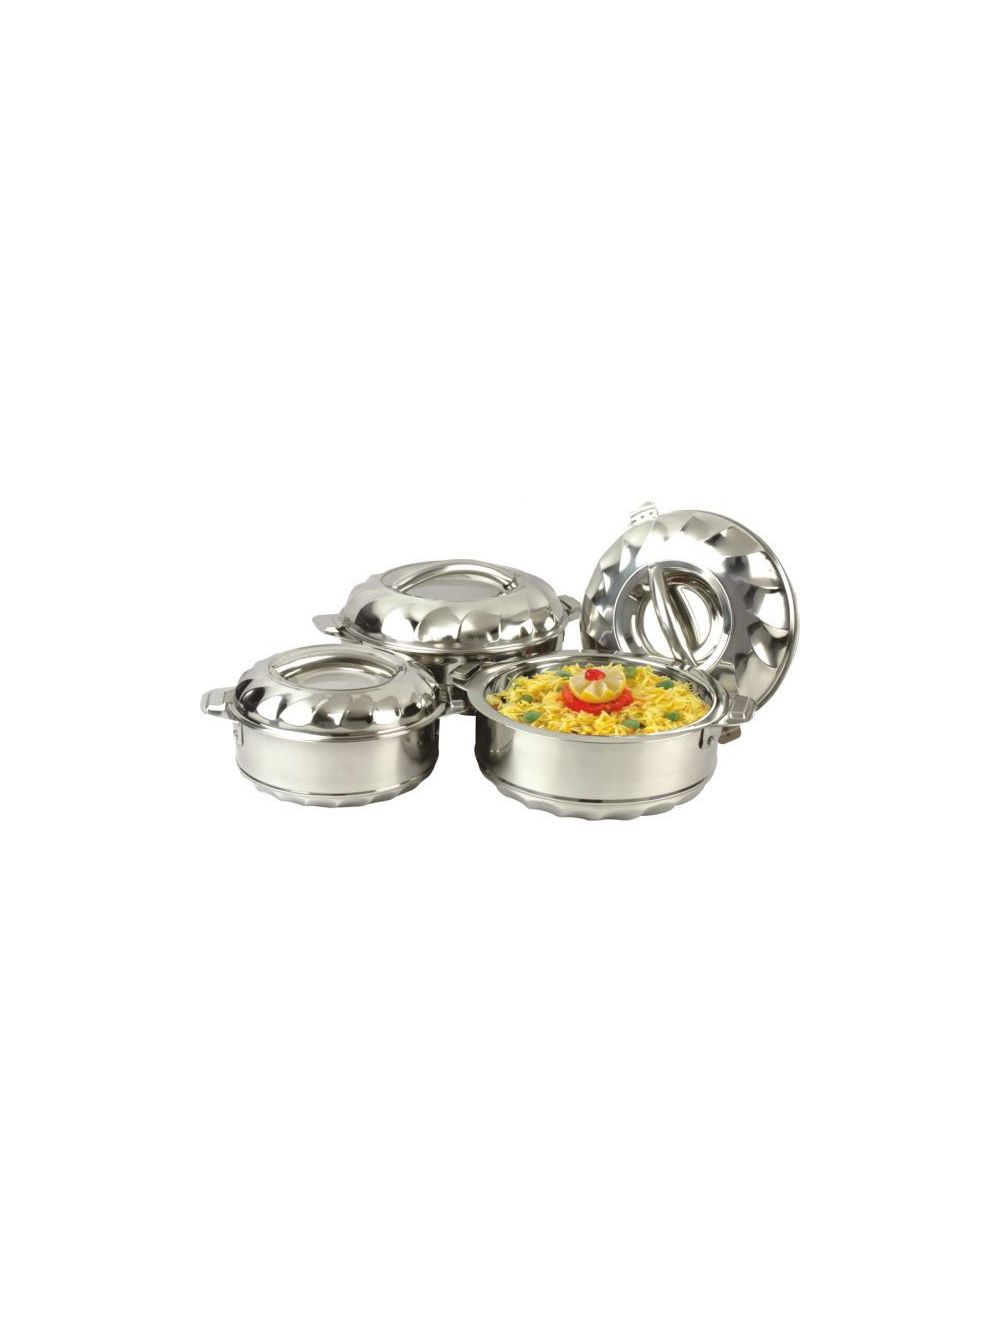 Dessini Pack Of 3 Stainless Steel Big Size Hotpot Set Silver-AKAT192